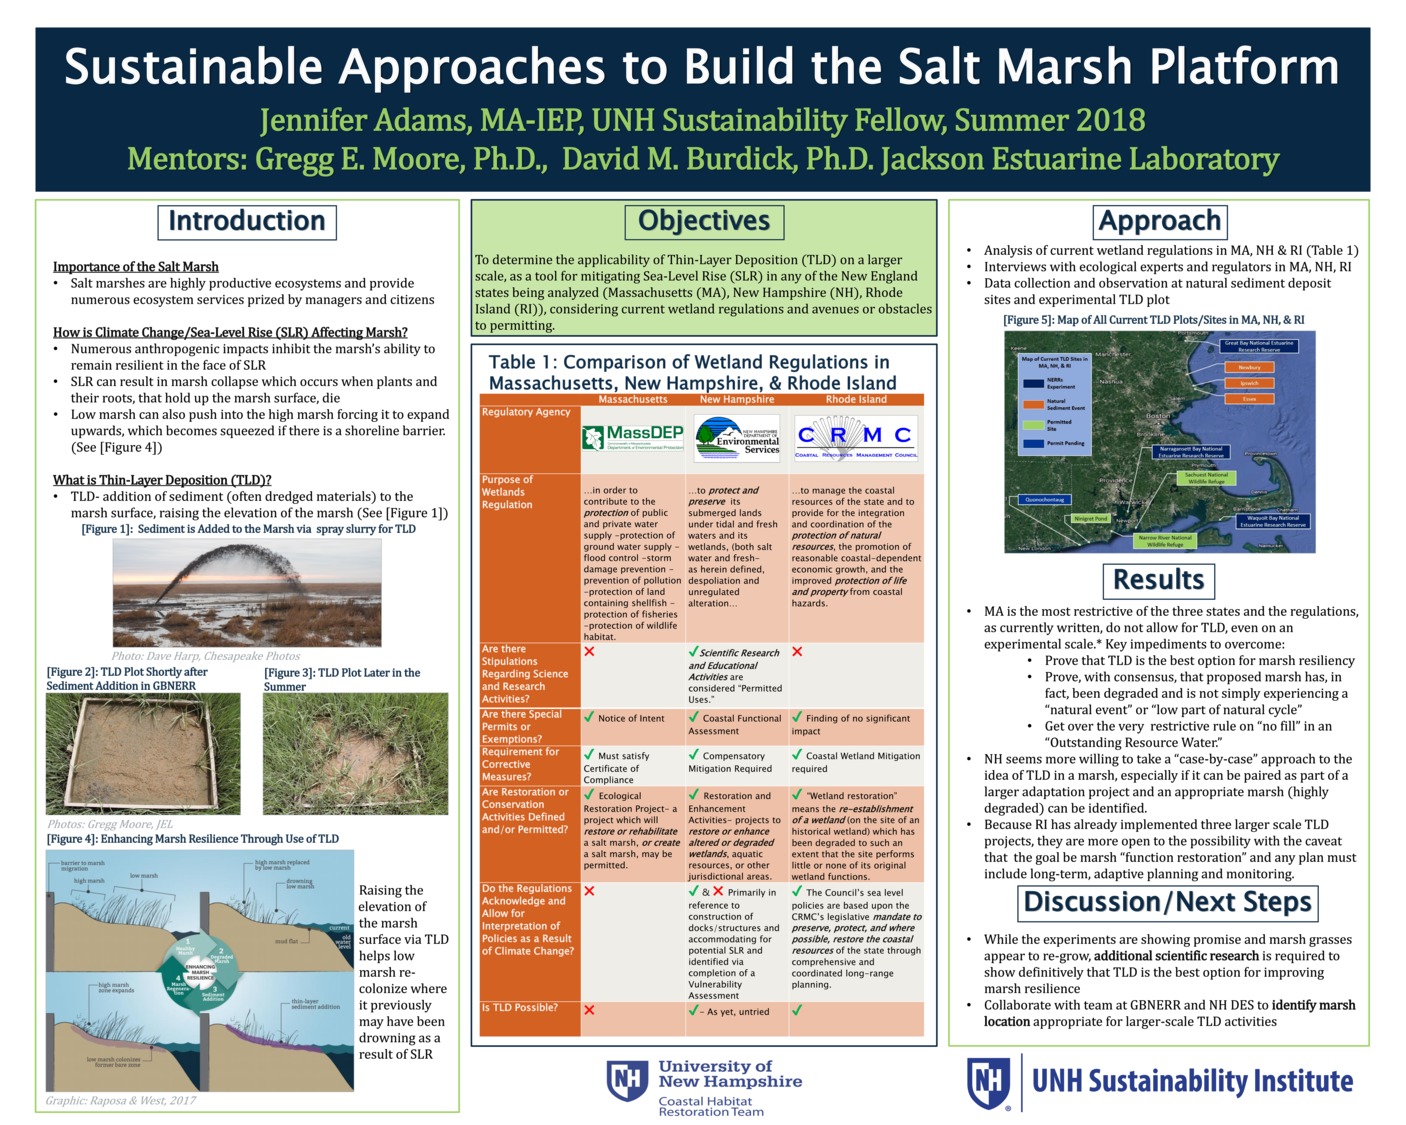 J Adams Sustainable Approaches To Build The Marsh Platform by JenAdams